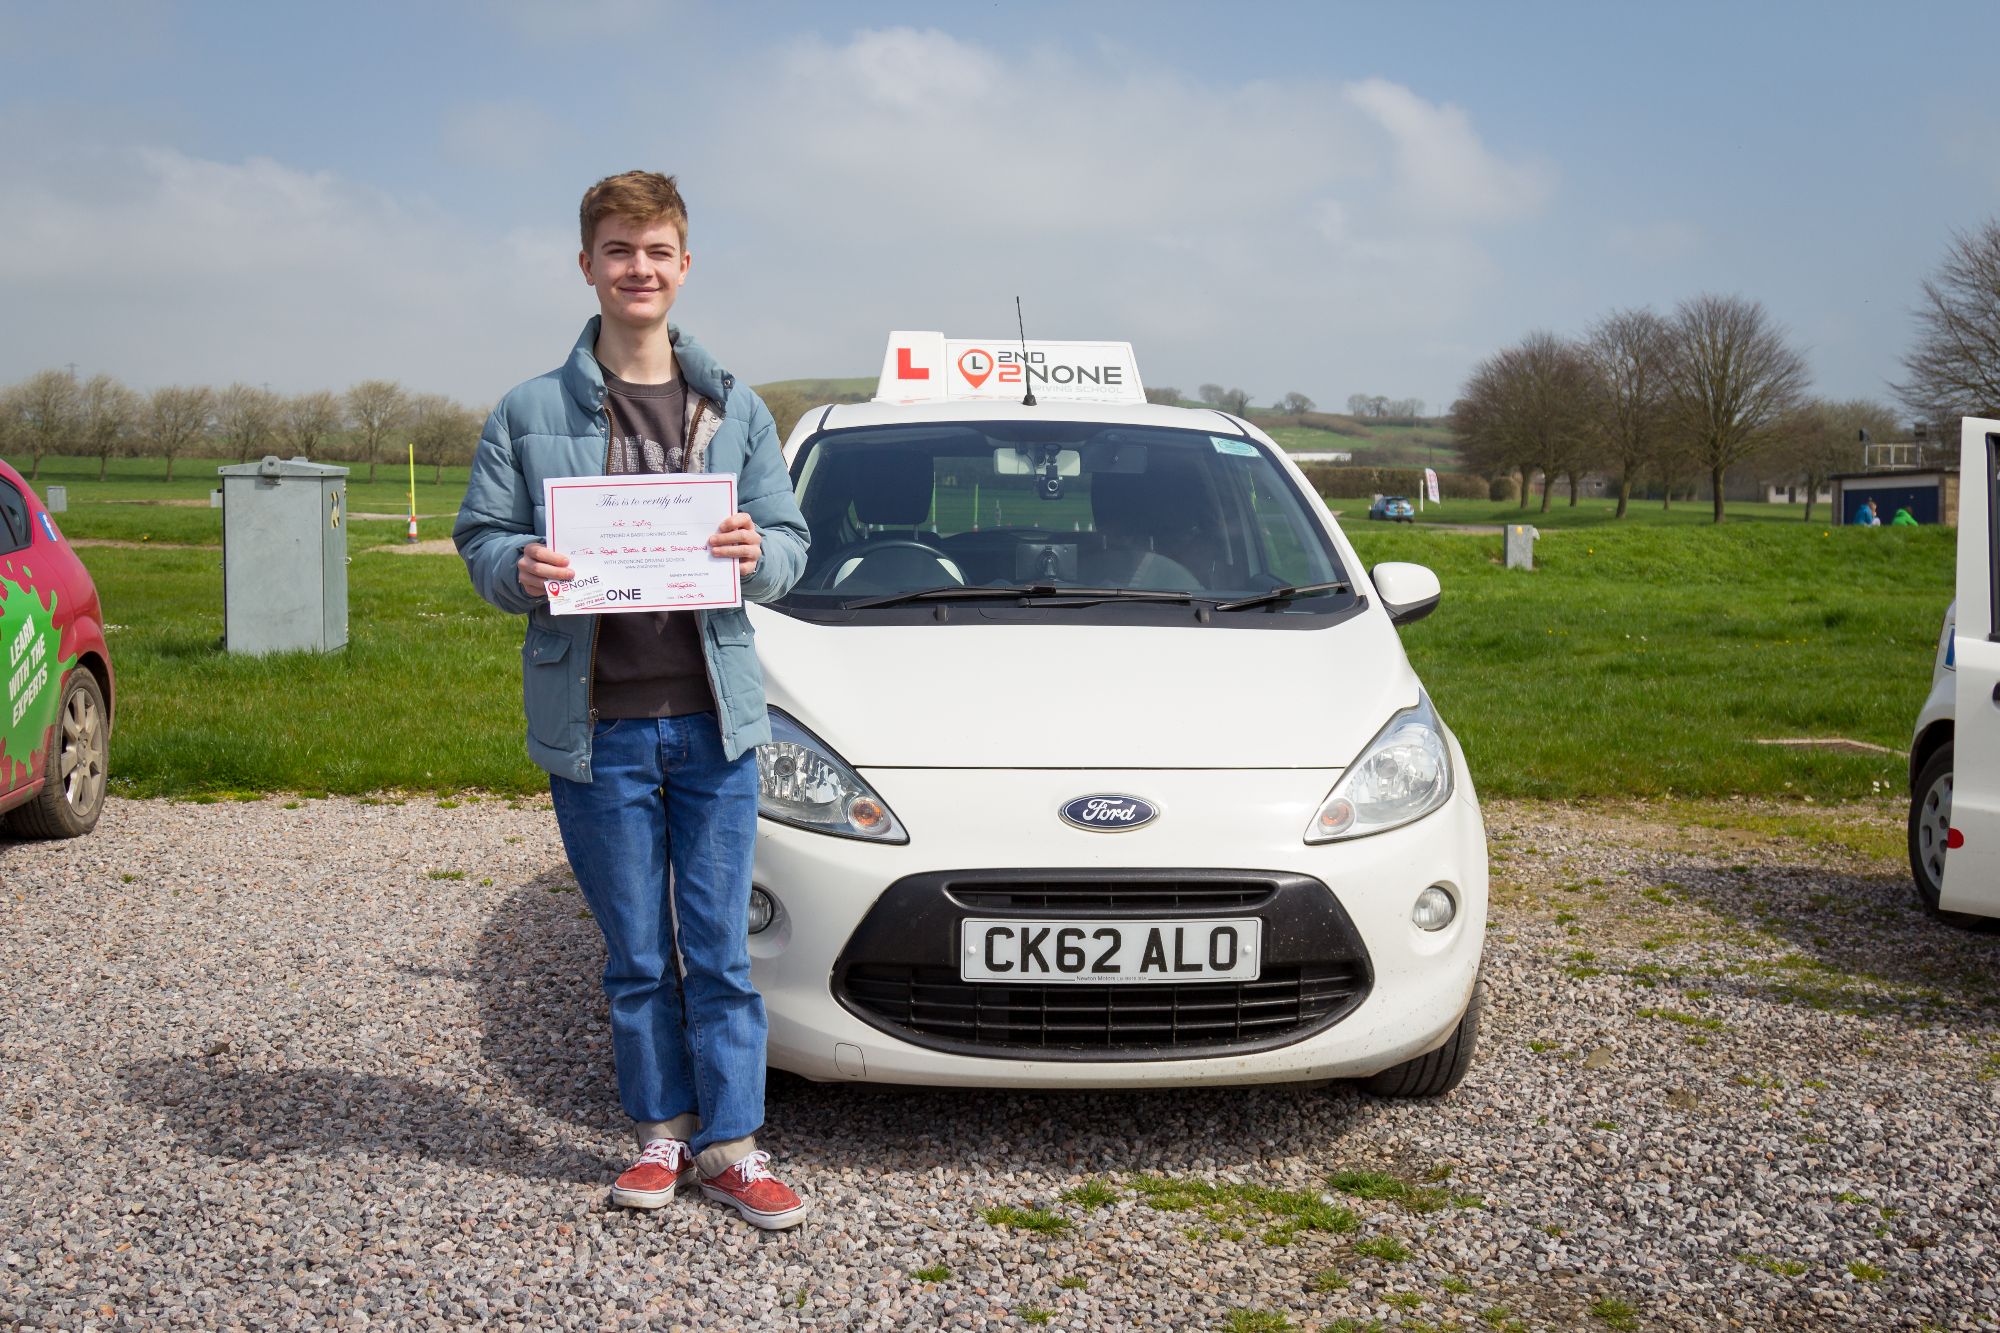 Driving Lessons Shaftesbury